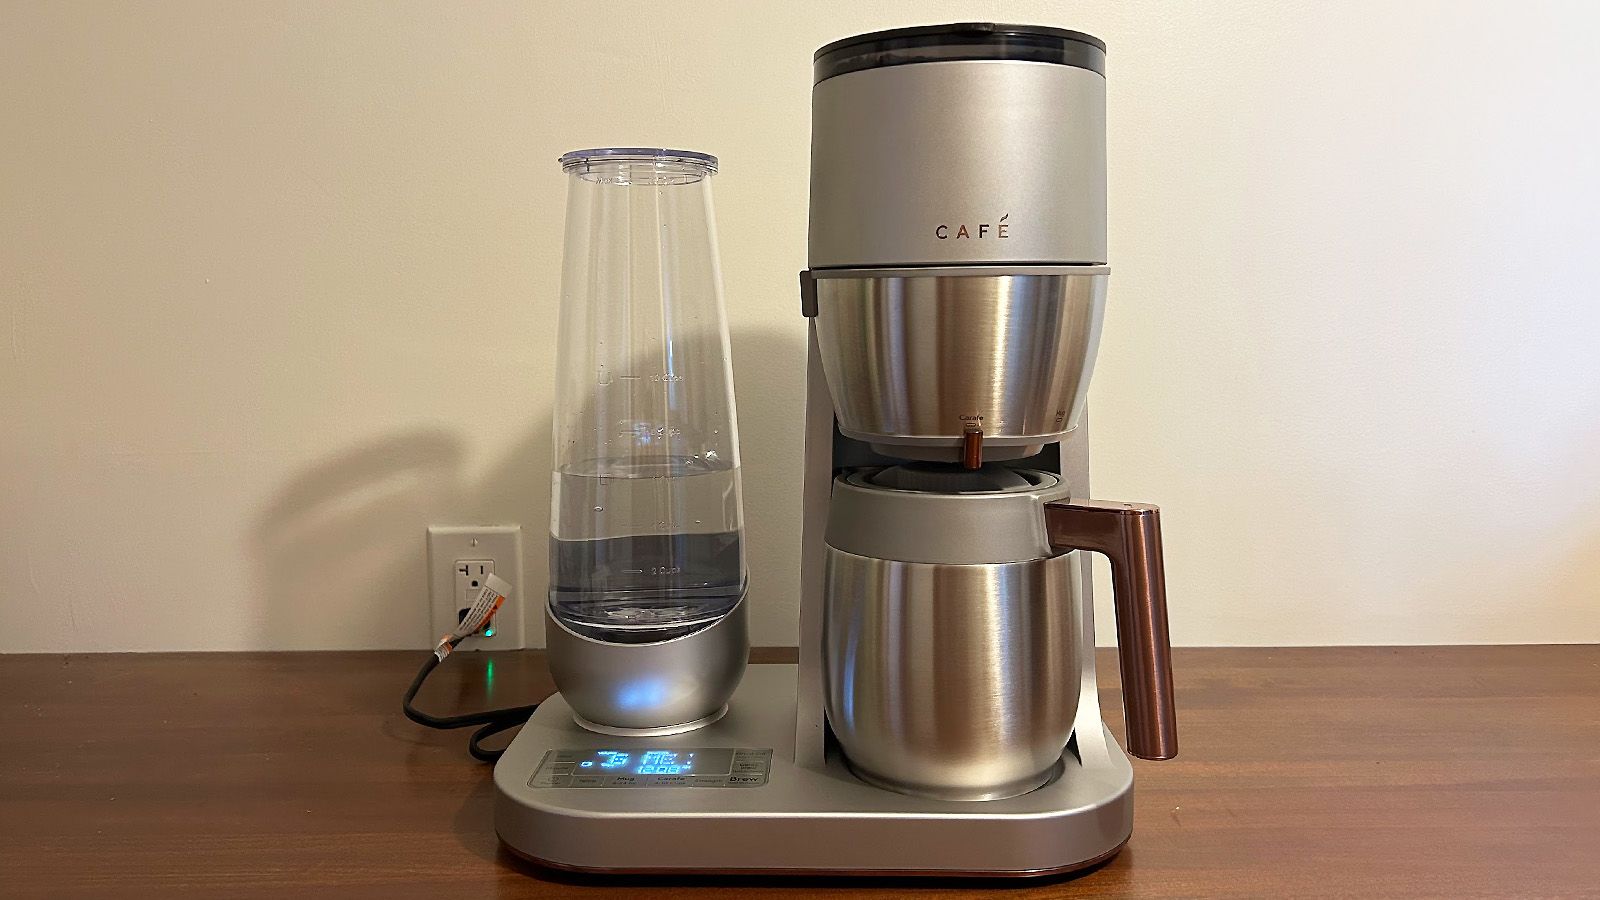 Black and Decker 12 Cup Thermal Carafe Coffee Maker Review 